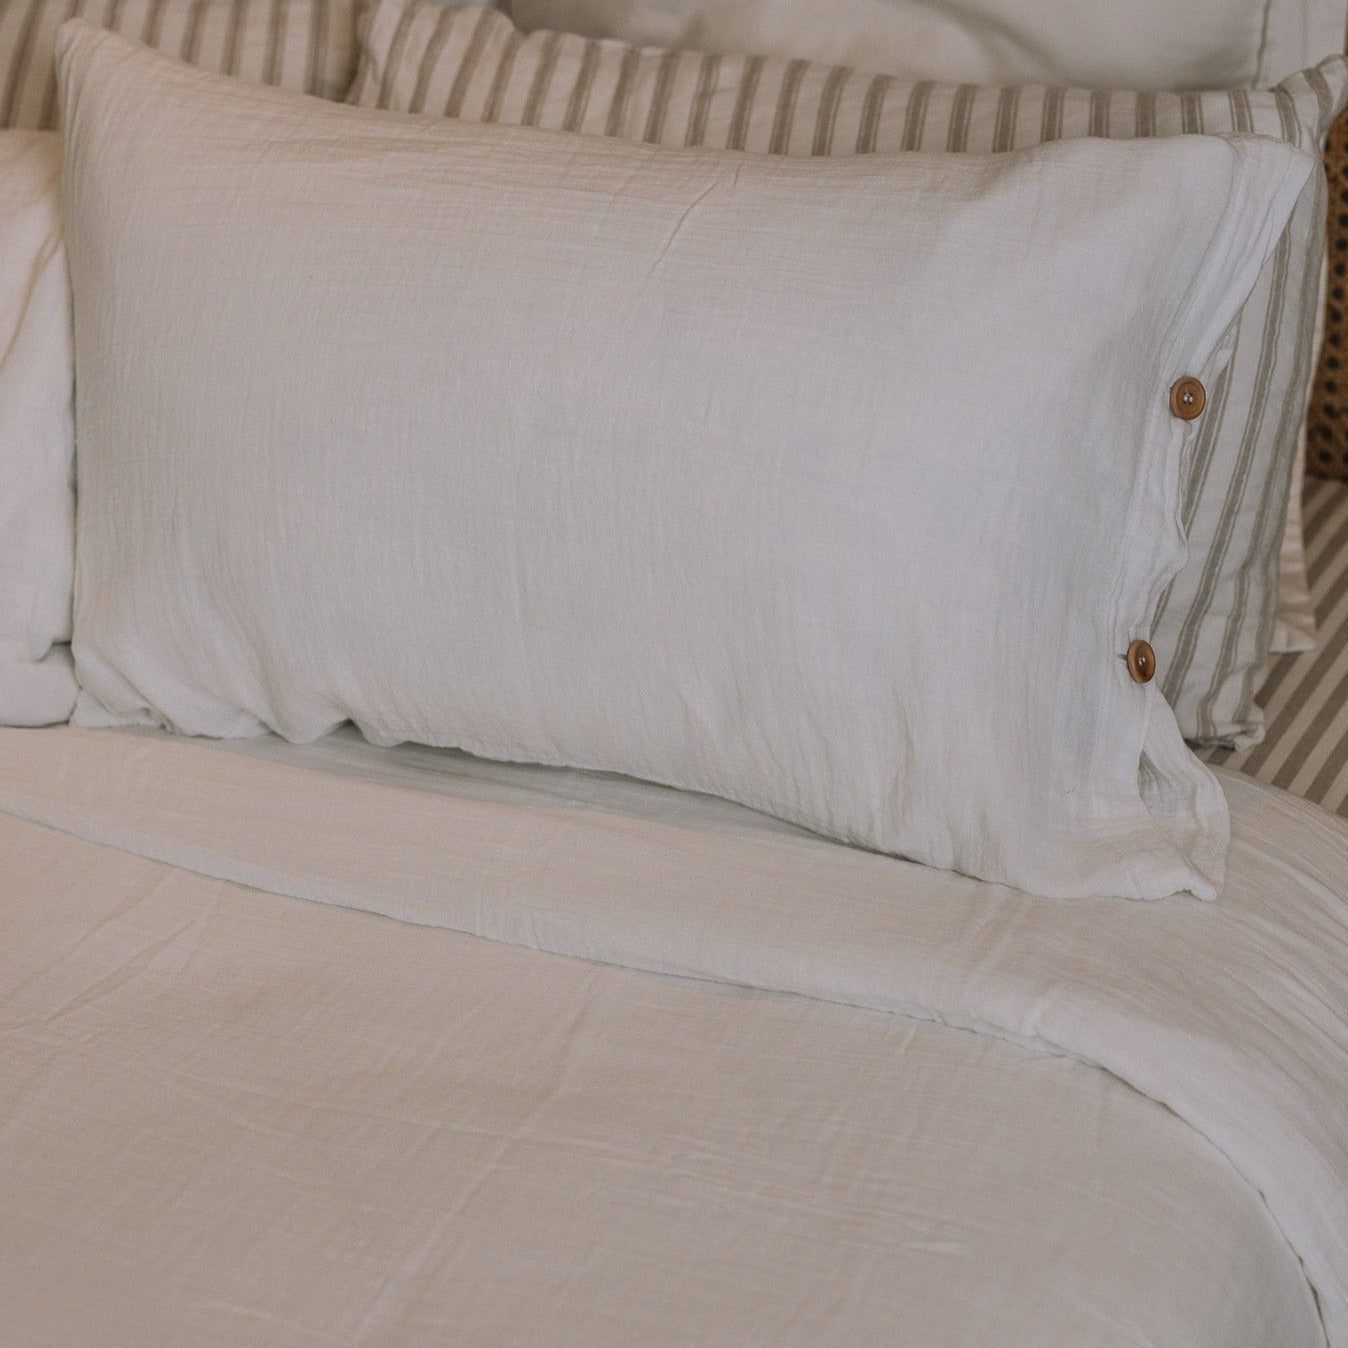 White and striped bedding with buttons.